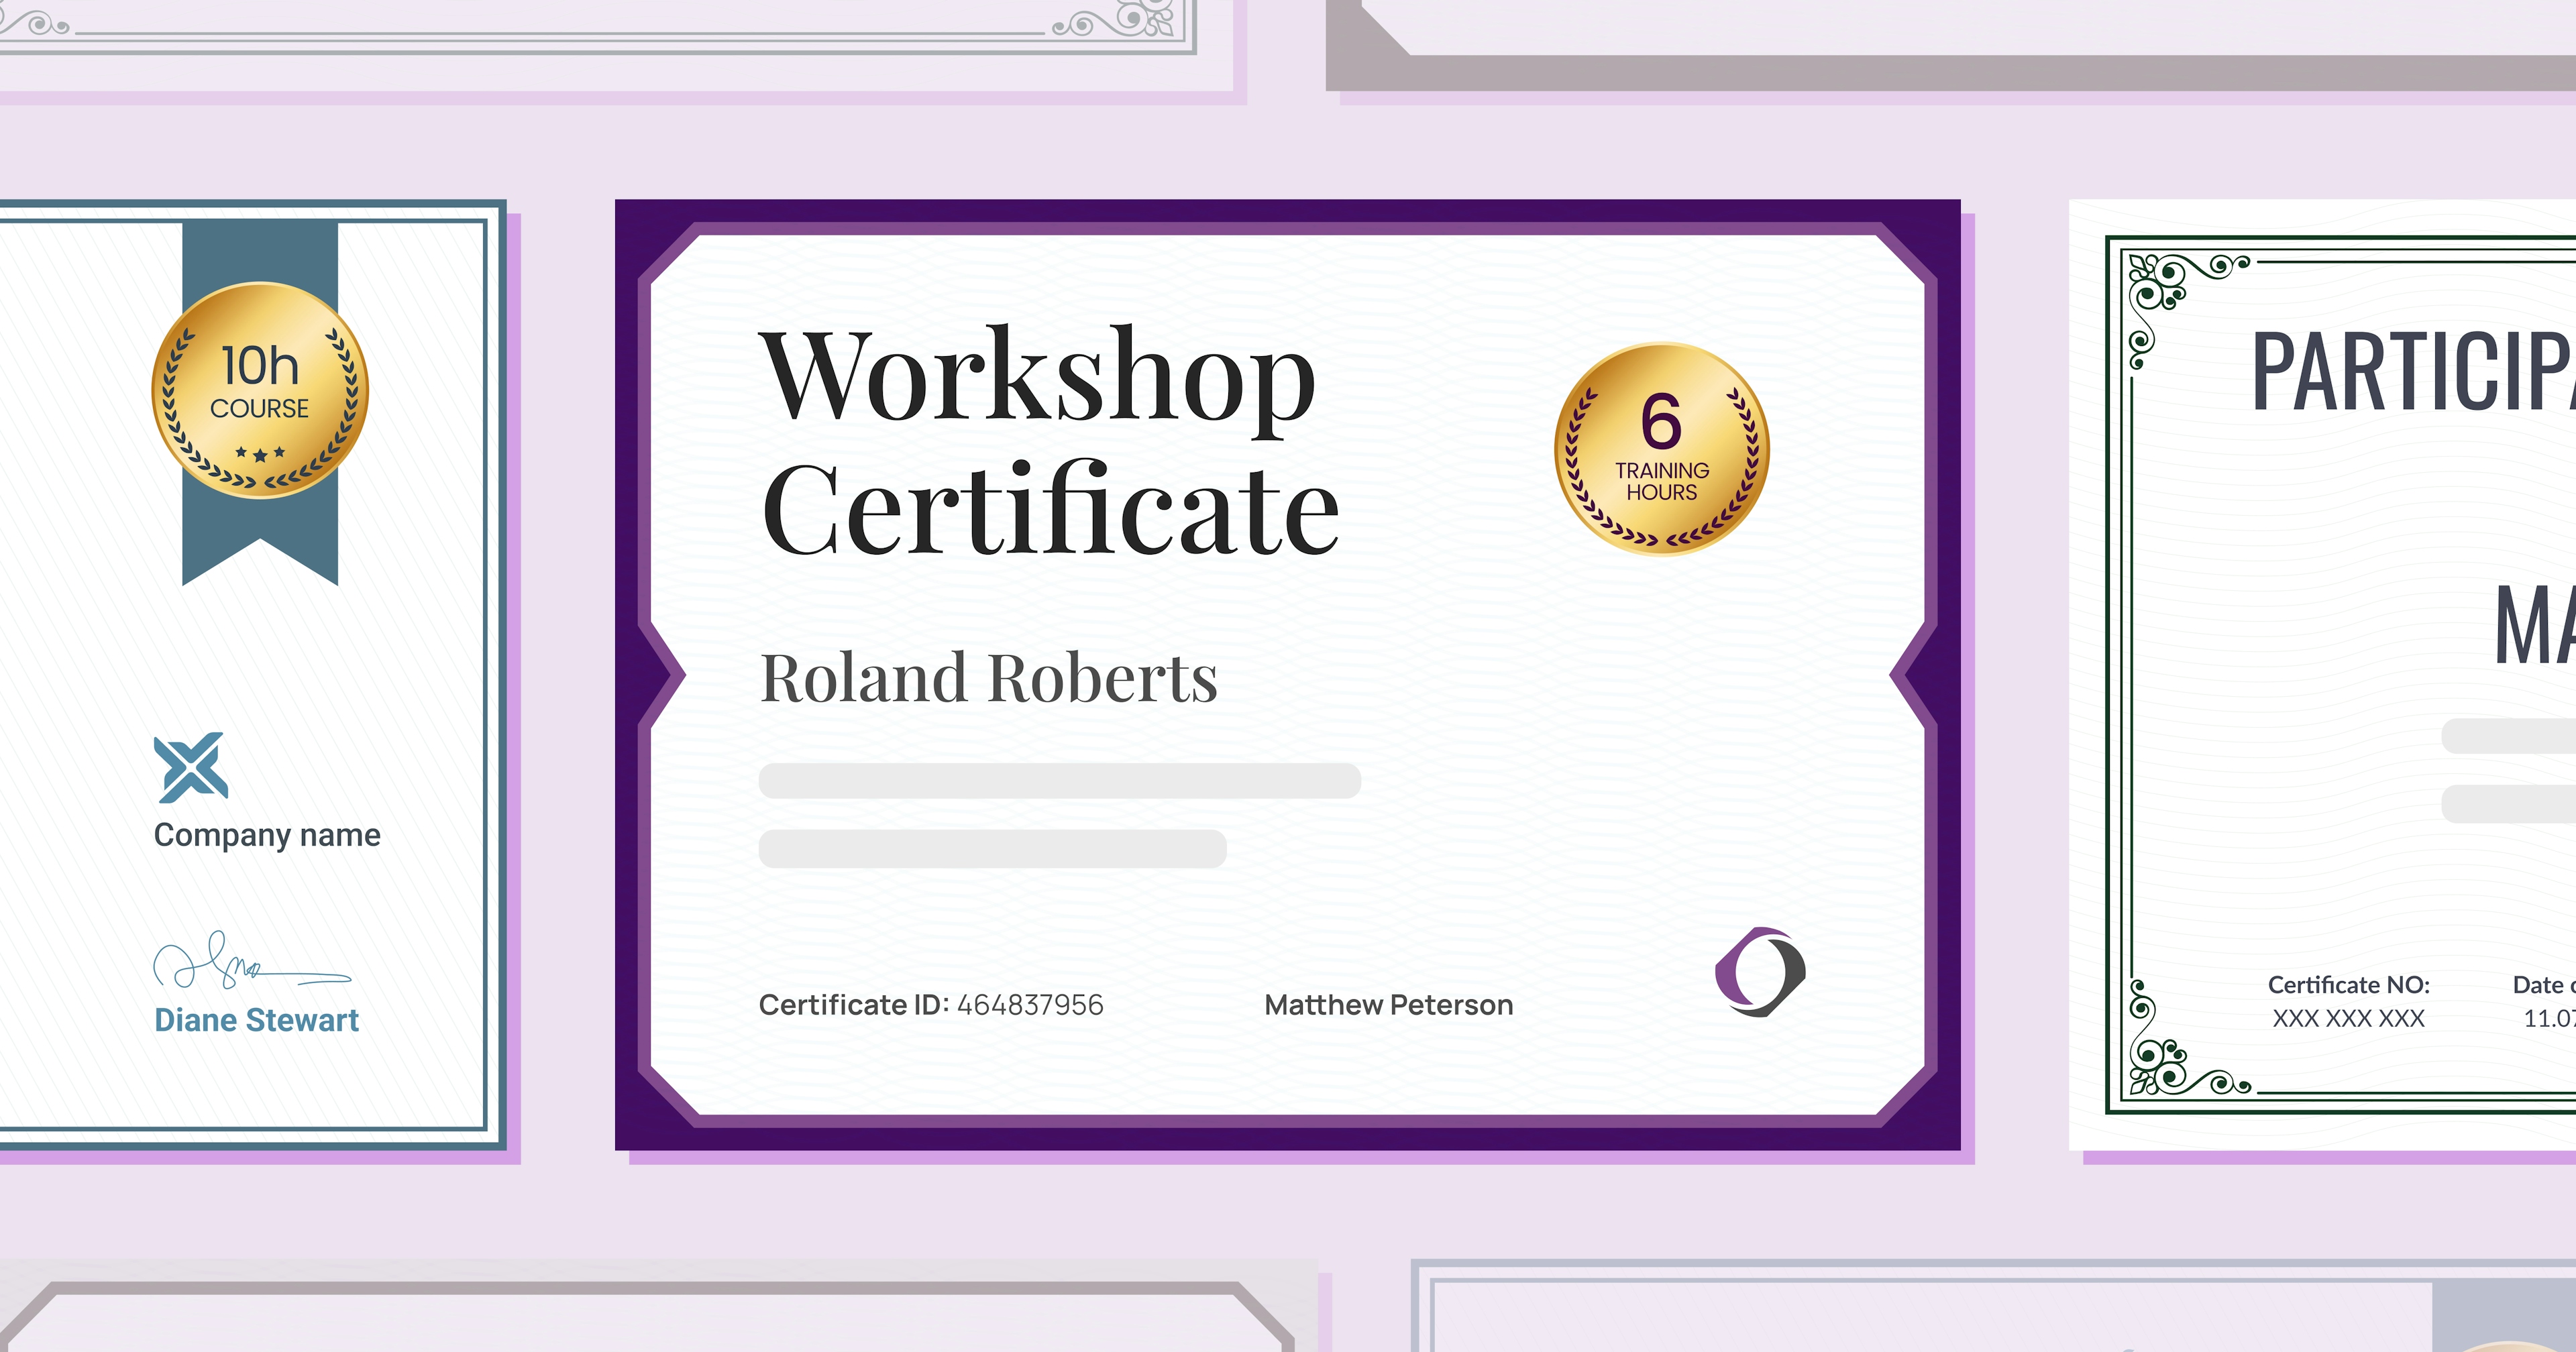 15 Workshop Certificate Templates to Download cover image